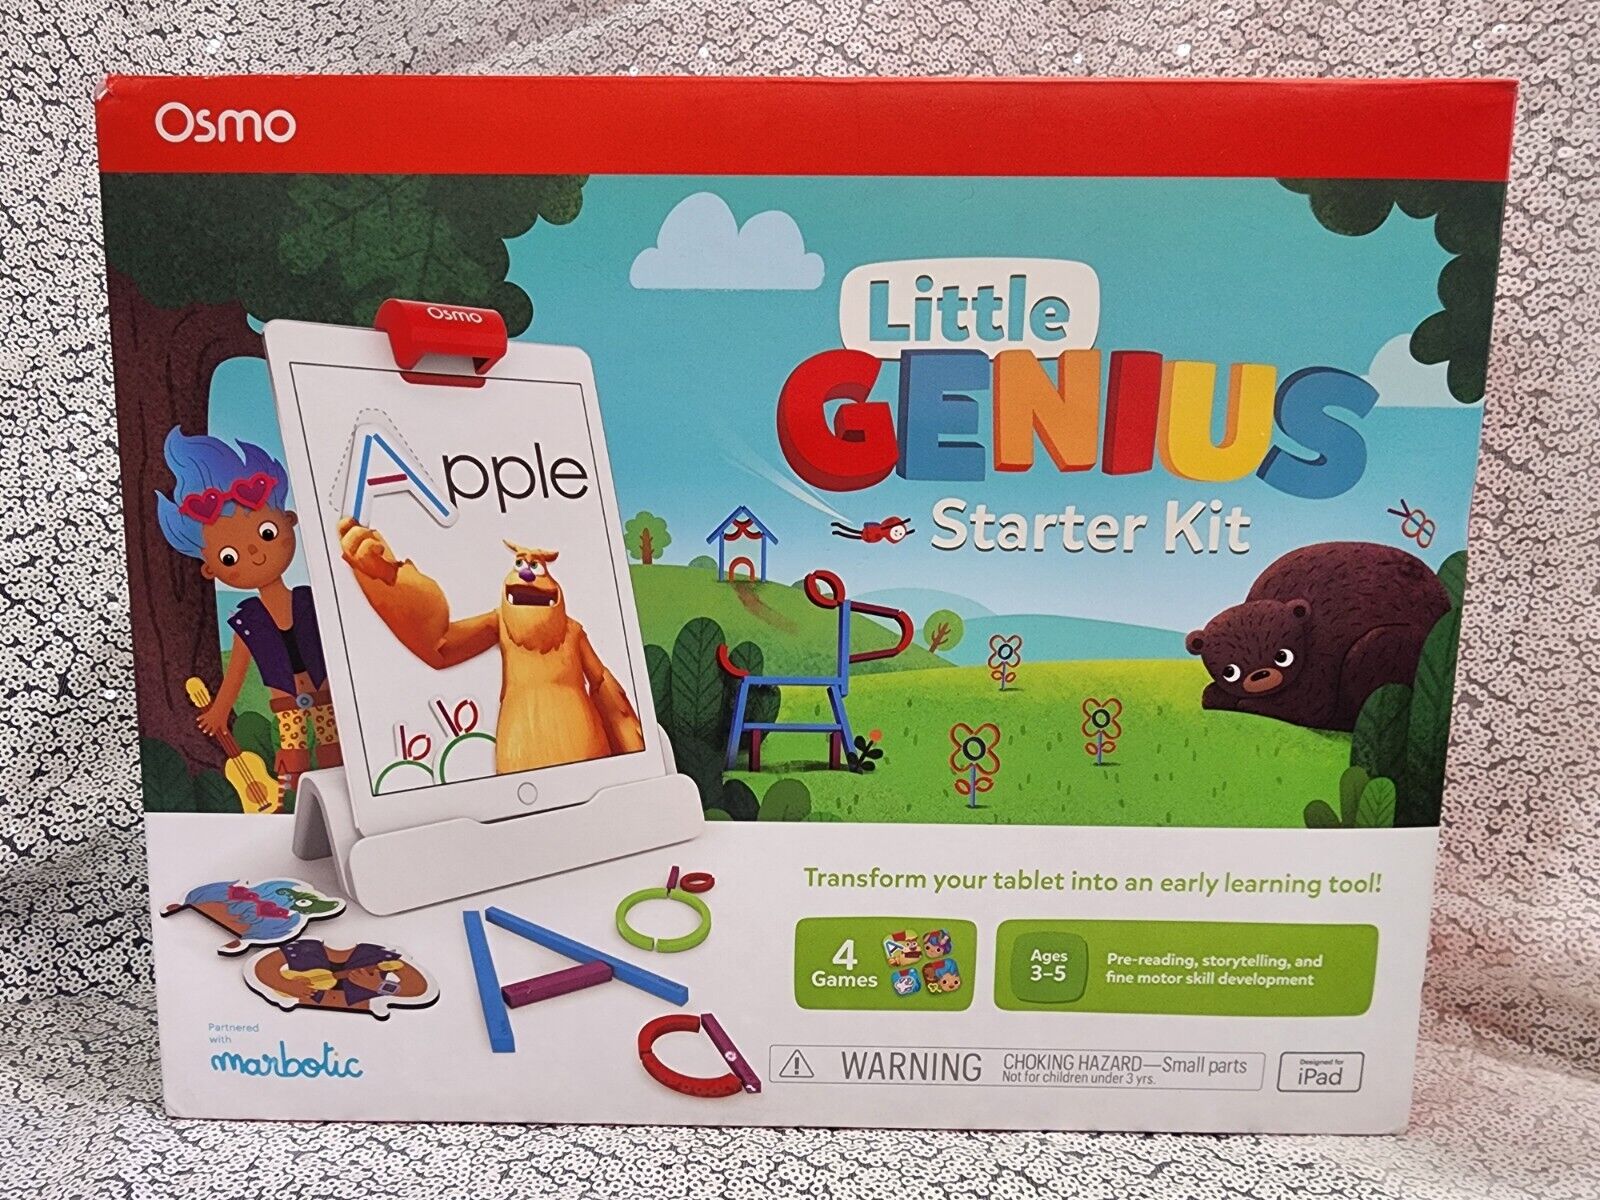 Osmo New Little Genius Starter Kit for iPad Ages 3-5 Learning Tool